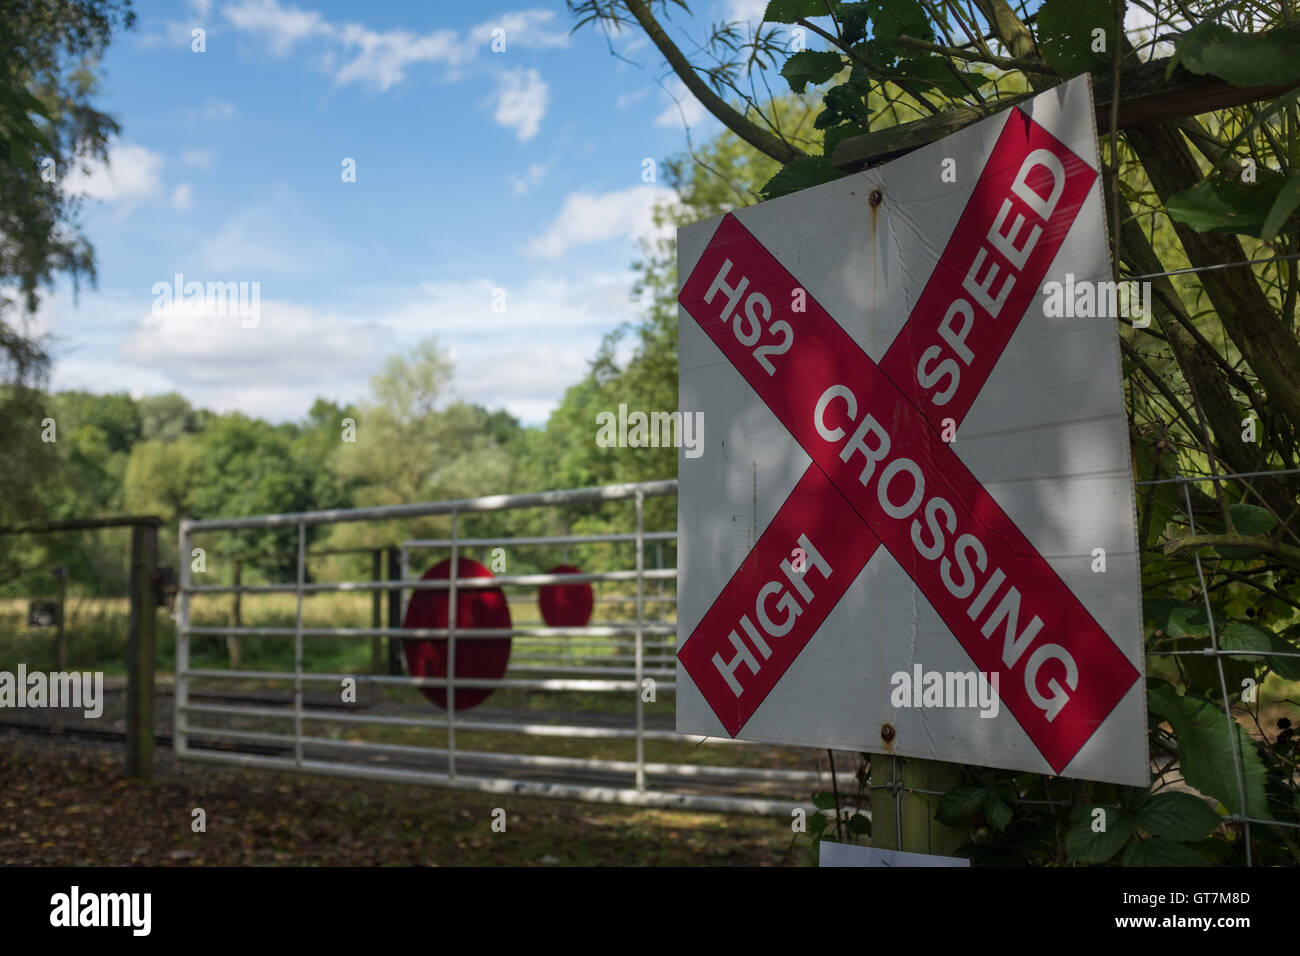 Sign for HS2 high speed rail crossing Stock Photo